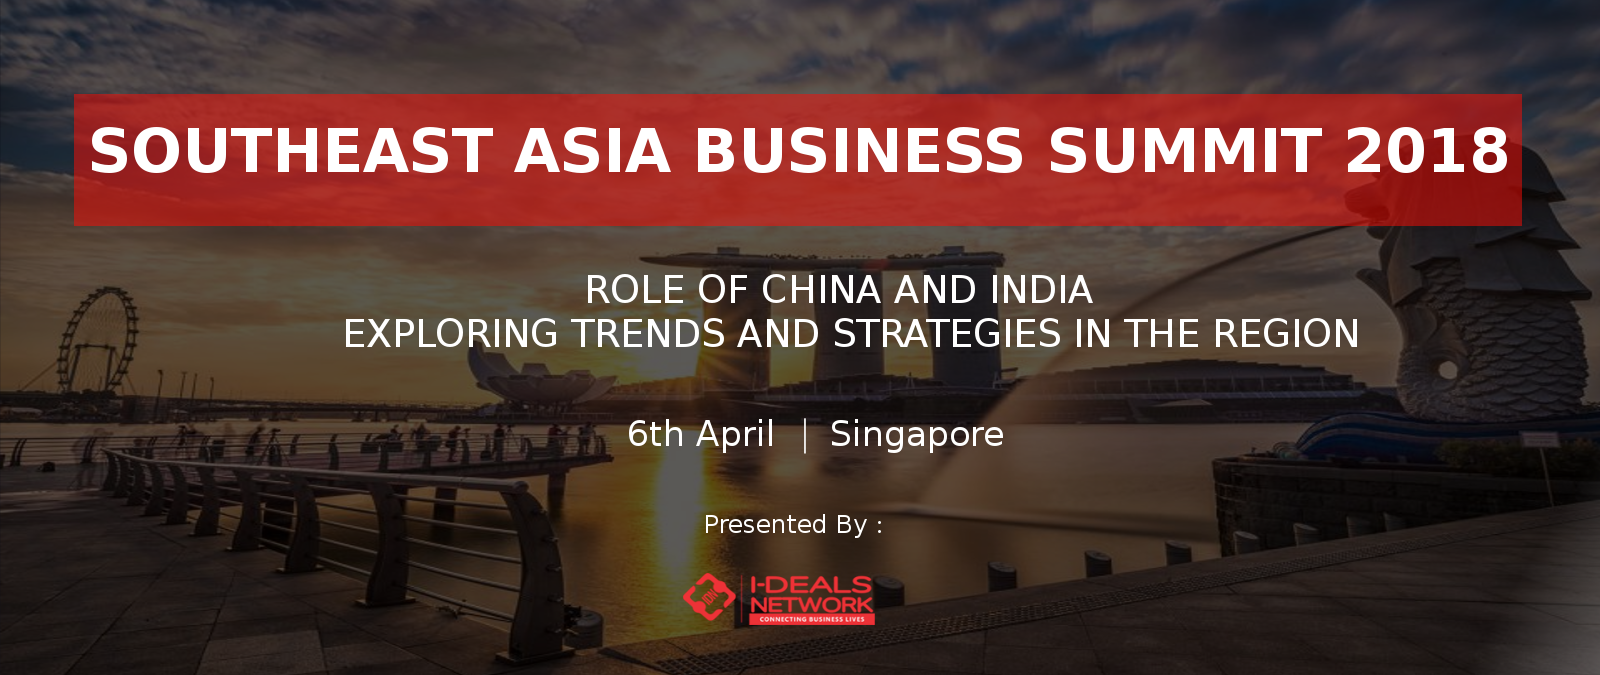 South East Asia Business Summit 2018 -singapore